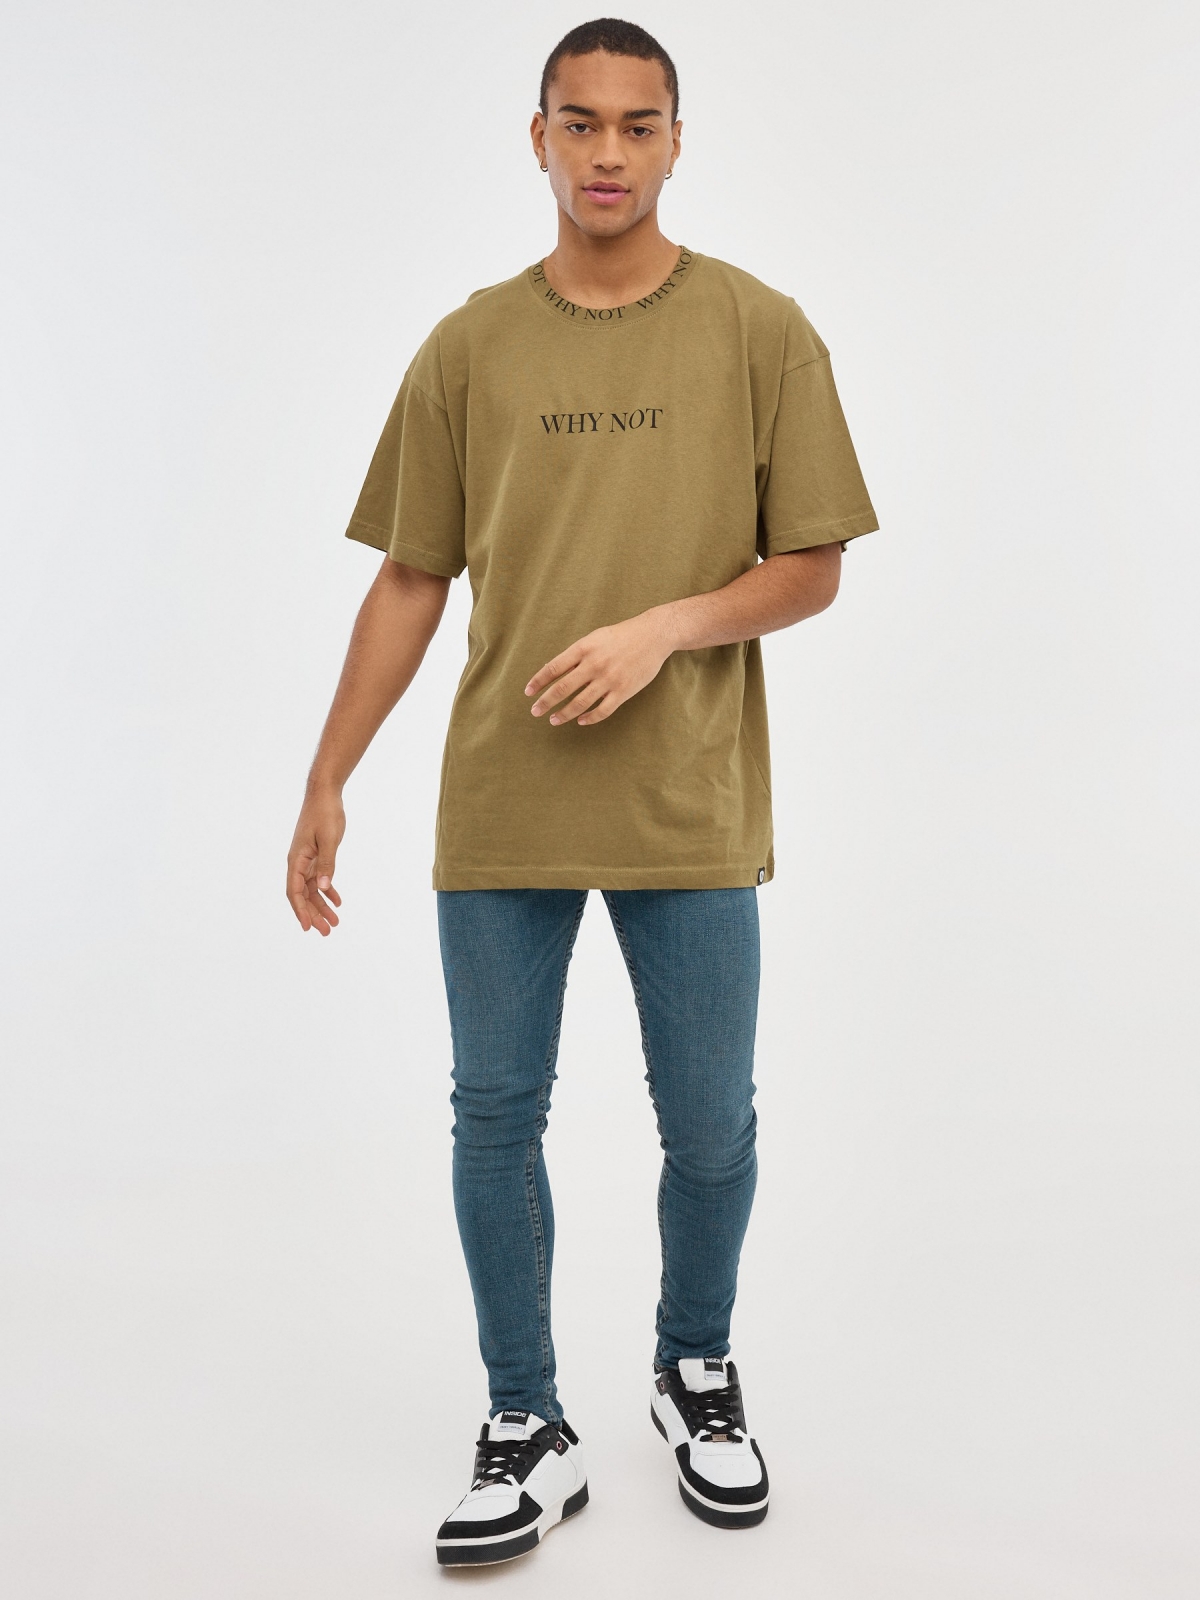 Why Not T-shirt khaki front view